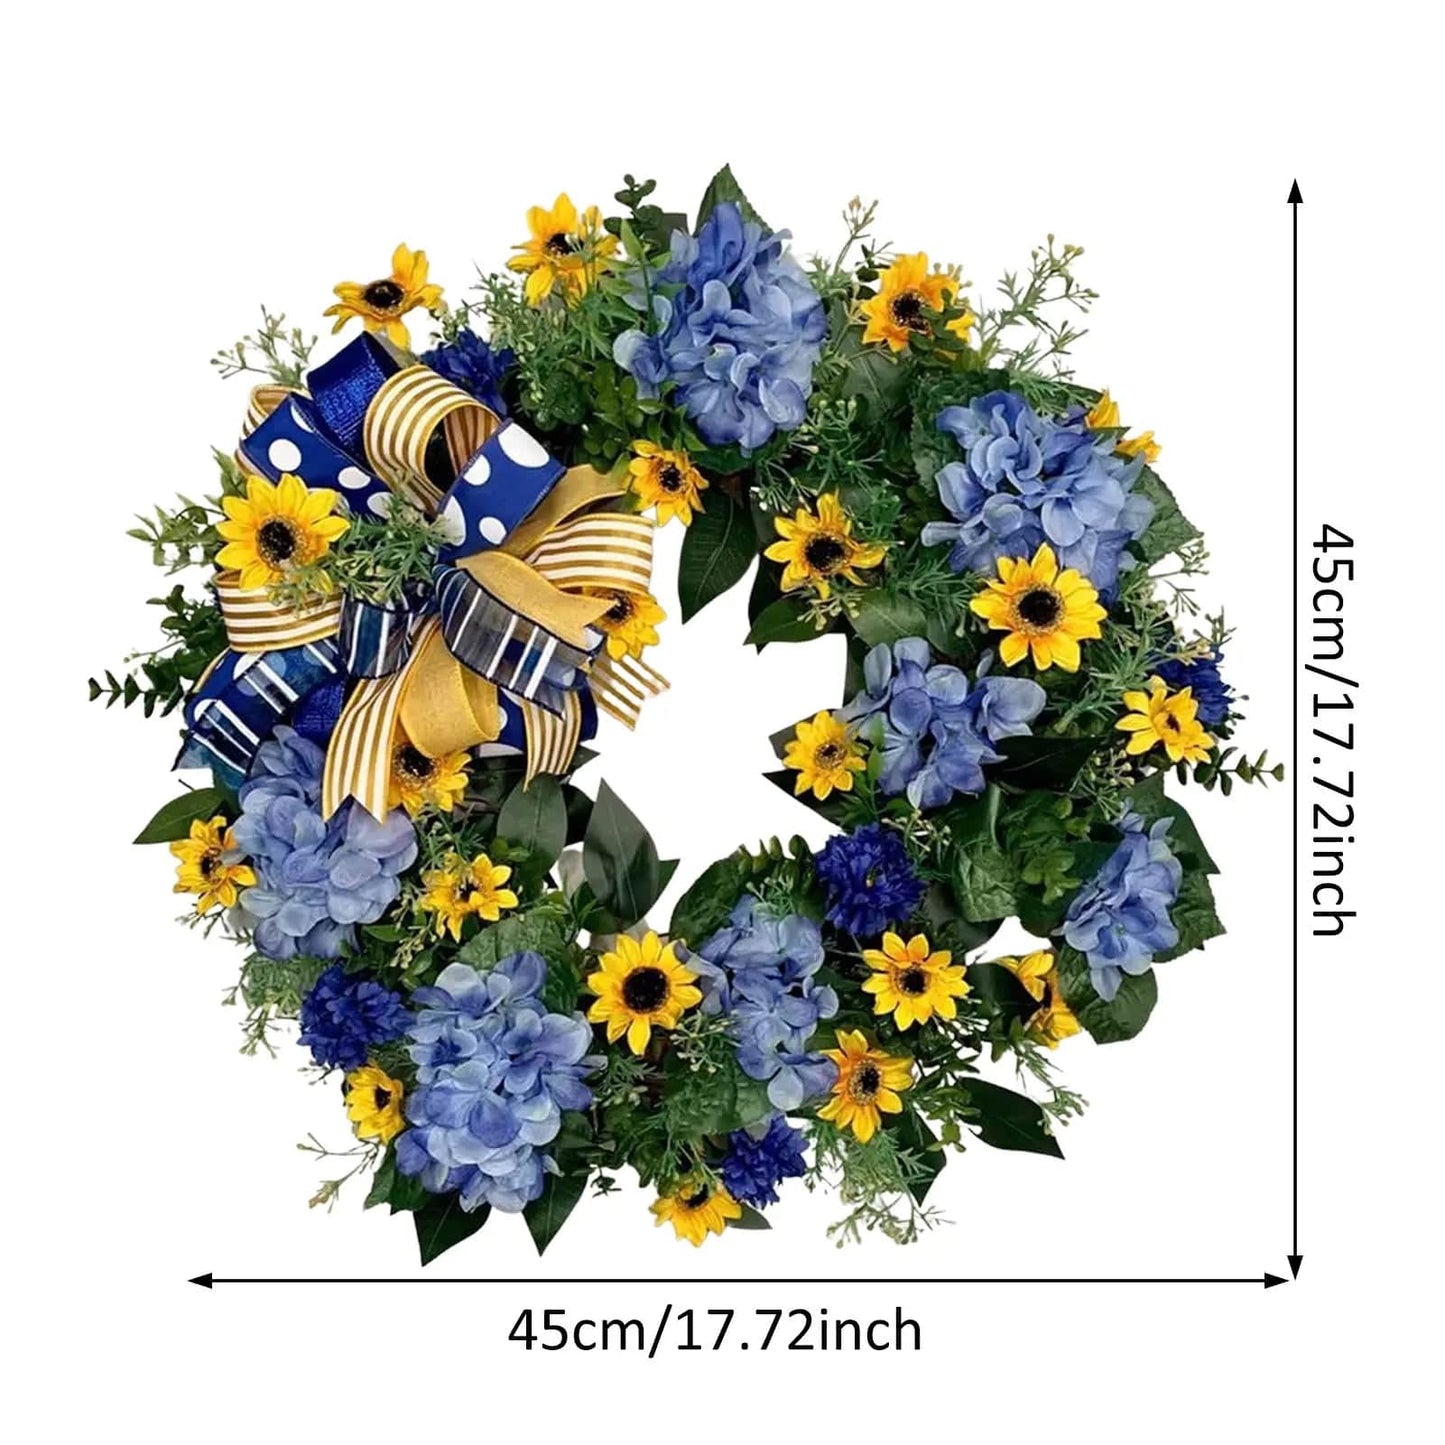 yellow-and-blue-wreath-18-inch-artificial-sunflower-wreath-spring-summer-sunflower-wreath-for-front-door-home-wall-wedding